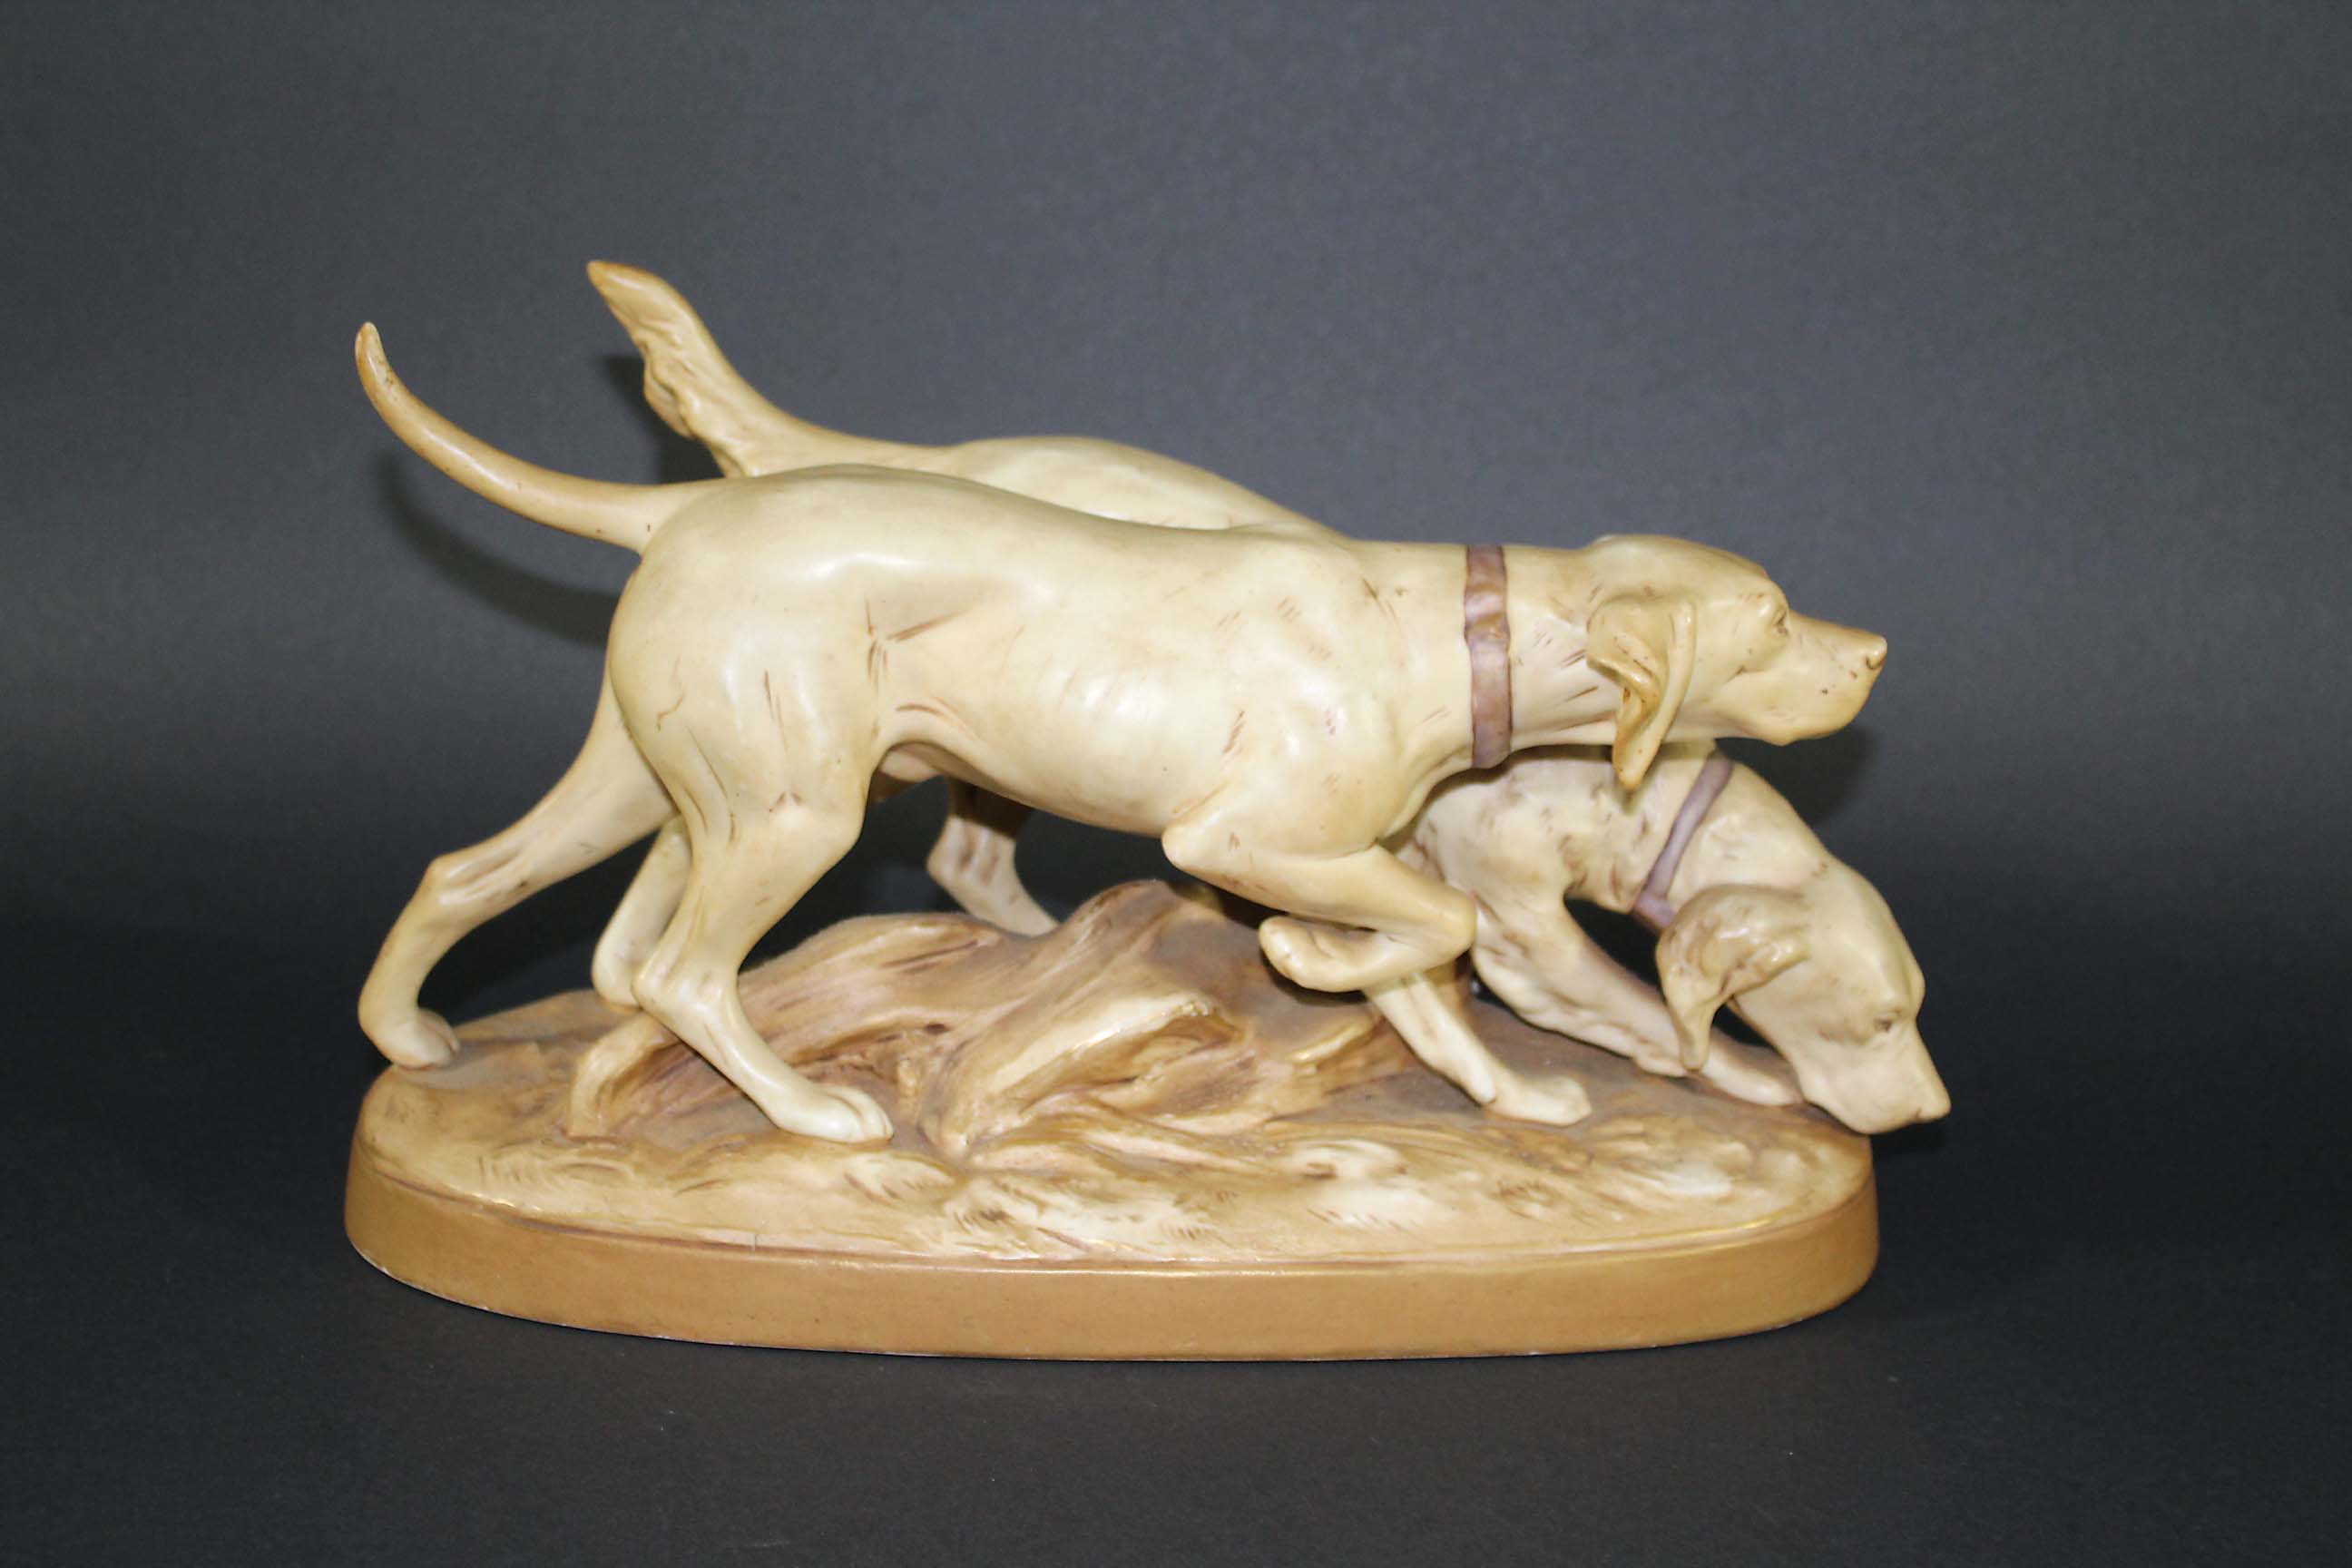 ROYAL DUX GROUP - GUN DOGS a pair of Gun Dogs on the scent, mounted on an oval base. Triangle mark